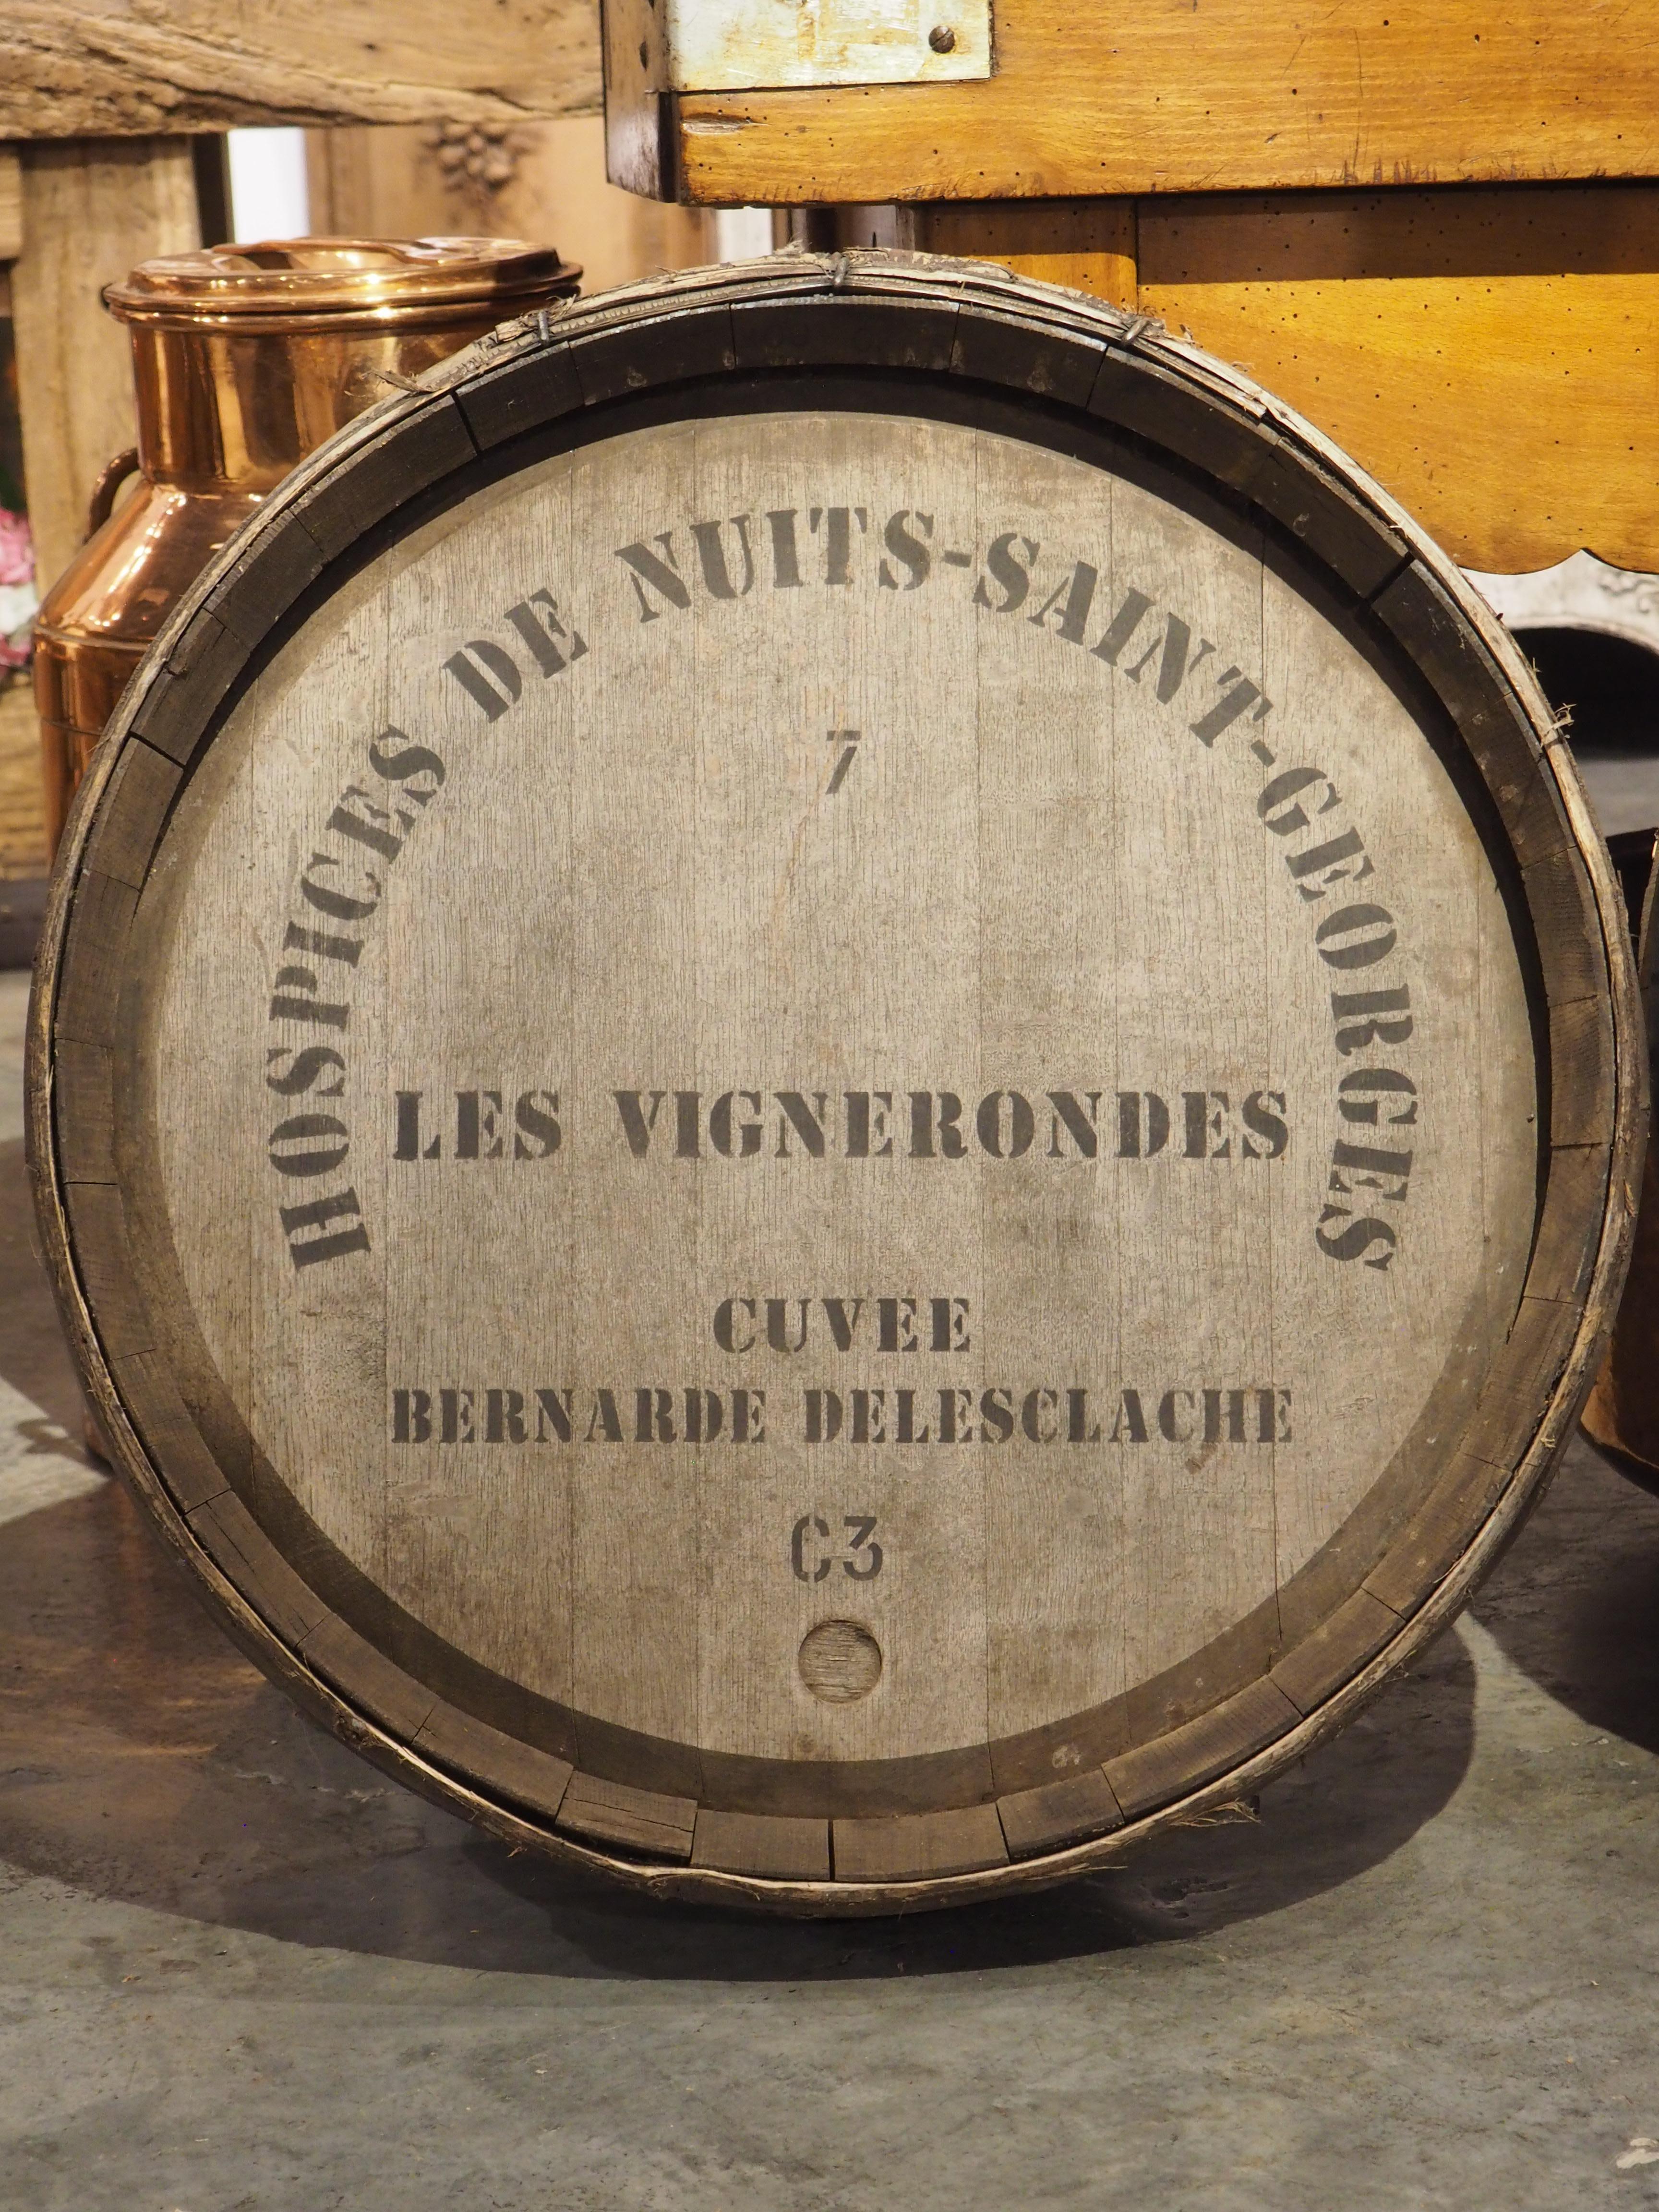 Pair of French Wine Barrel Facades, “Hospices de Nuits-Saint-Georges”, 1900s For Sale 5